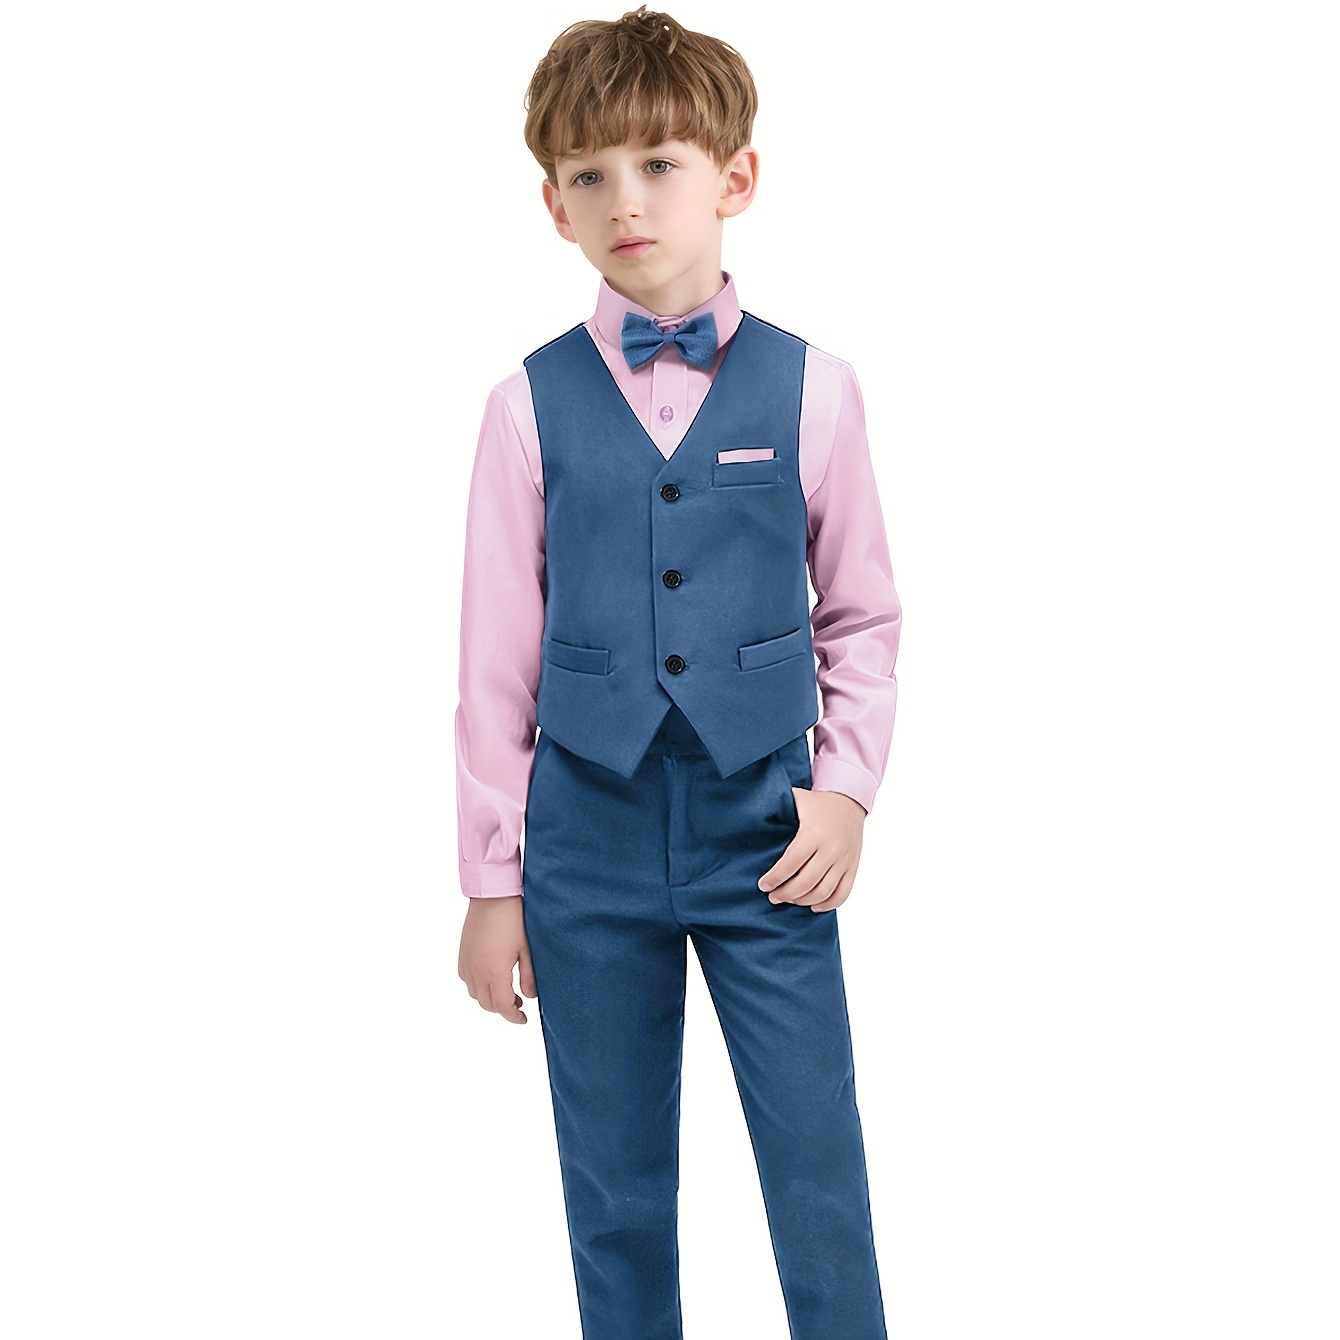 

4pcs Boy's Gentleman Outfit, Bowtie & Shirt & Vest & Suit Pants Set, Formal Wear For Speech Performance Birthday Party, Kid's Clothes For Spring Fall Winter